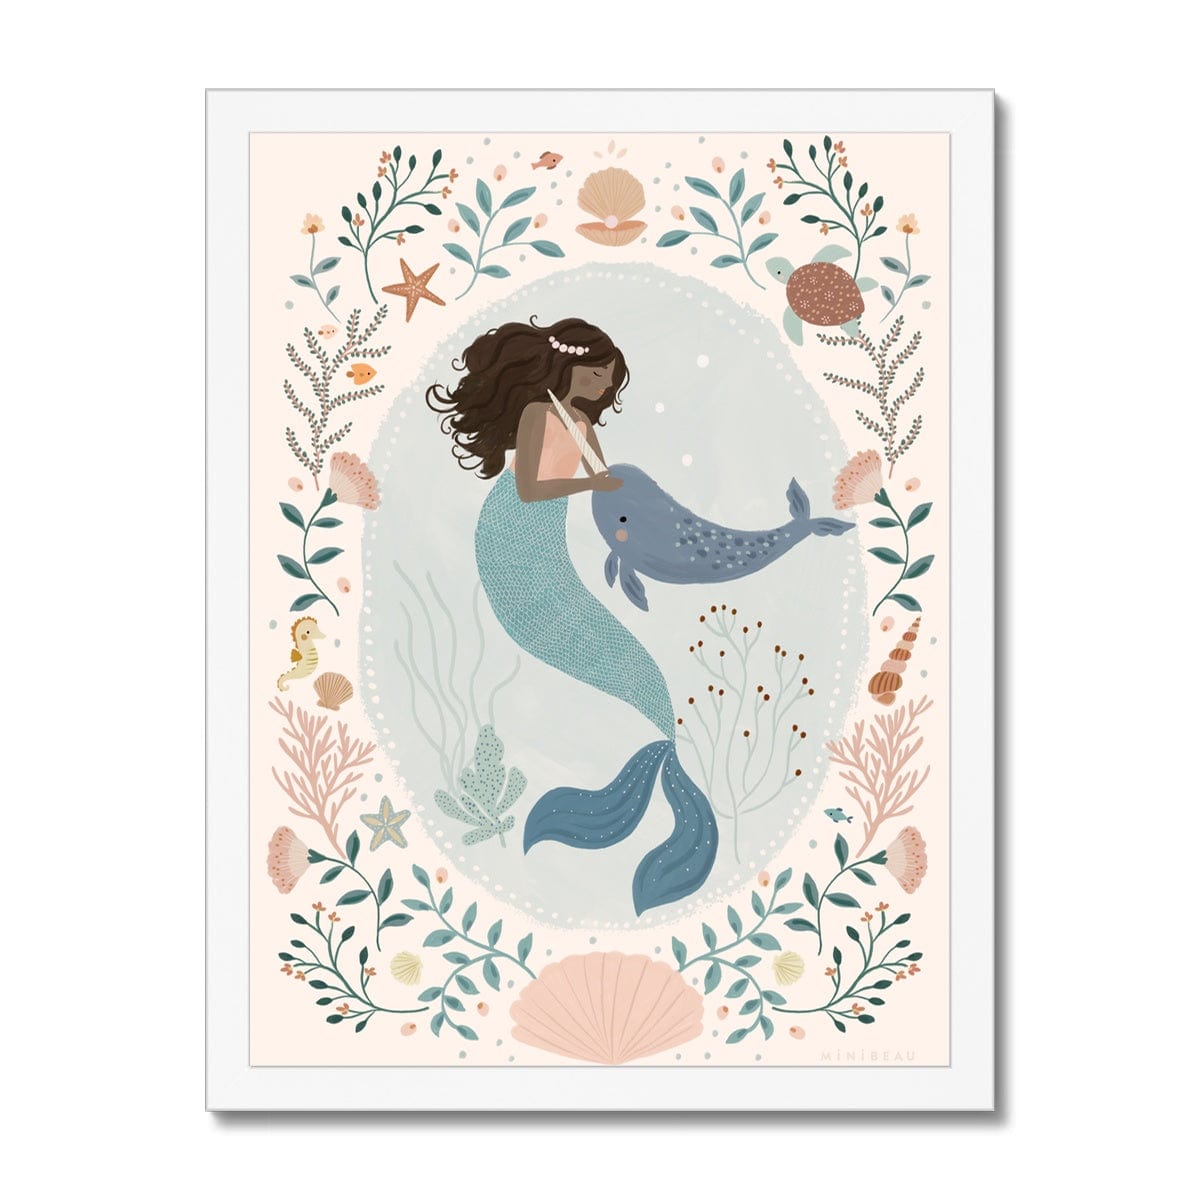 Beautiful dark skinned and haired mermaid with a pearl headband petting her friend Narwhal within a pale teal coloured oval background with white dots round the edge. On the outside of the oval is a sea themed border on a neutral background. The border consists of foliage, flowers and items you would find at the bottom of the sea, shells, turtle, sea horse with a large clam shell at the bottom, in a white frame